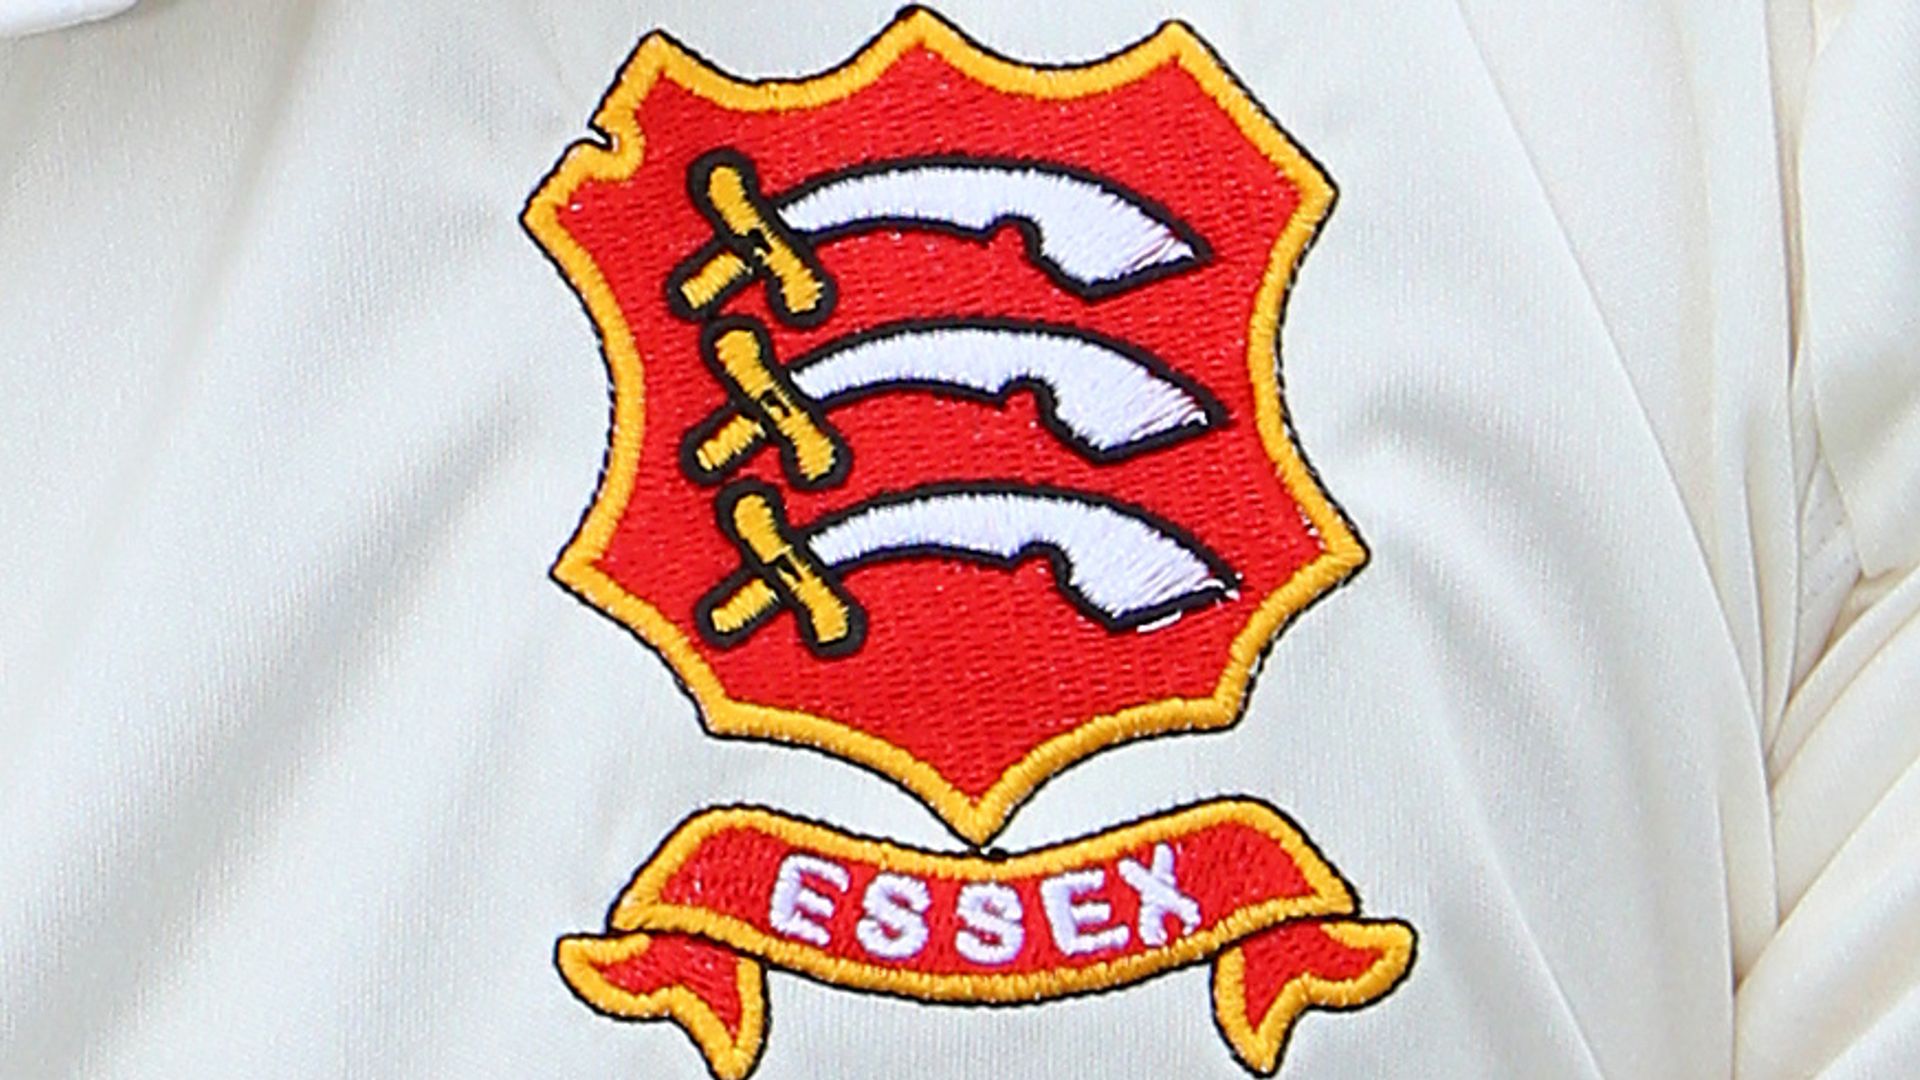 Essex fined over racial slur made during board meetingSkySports | News